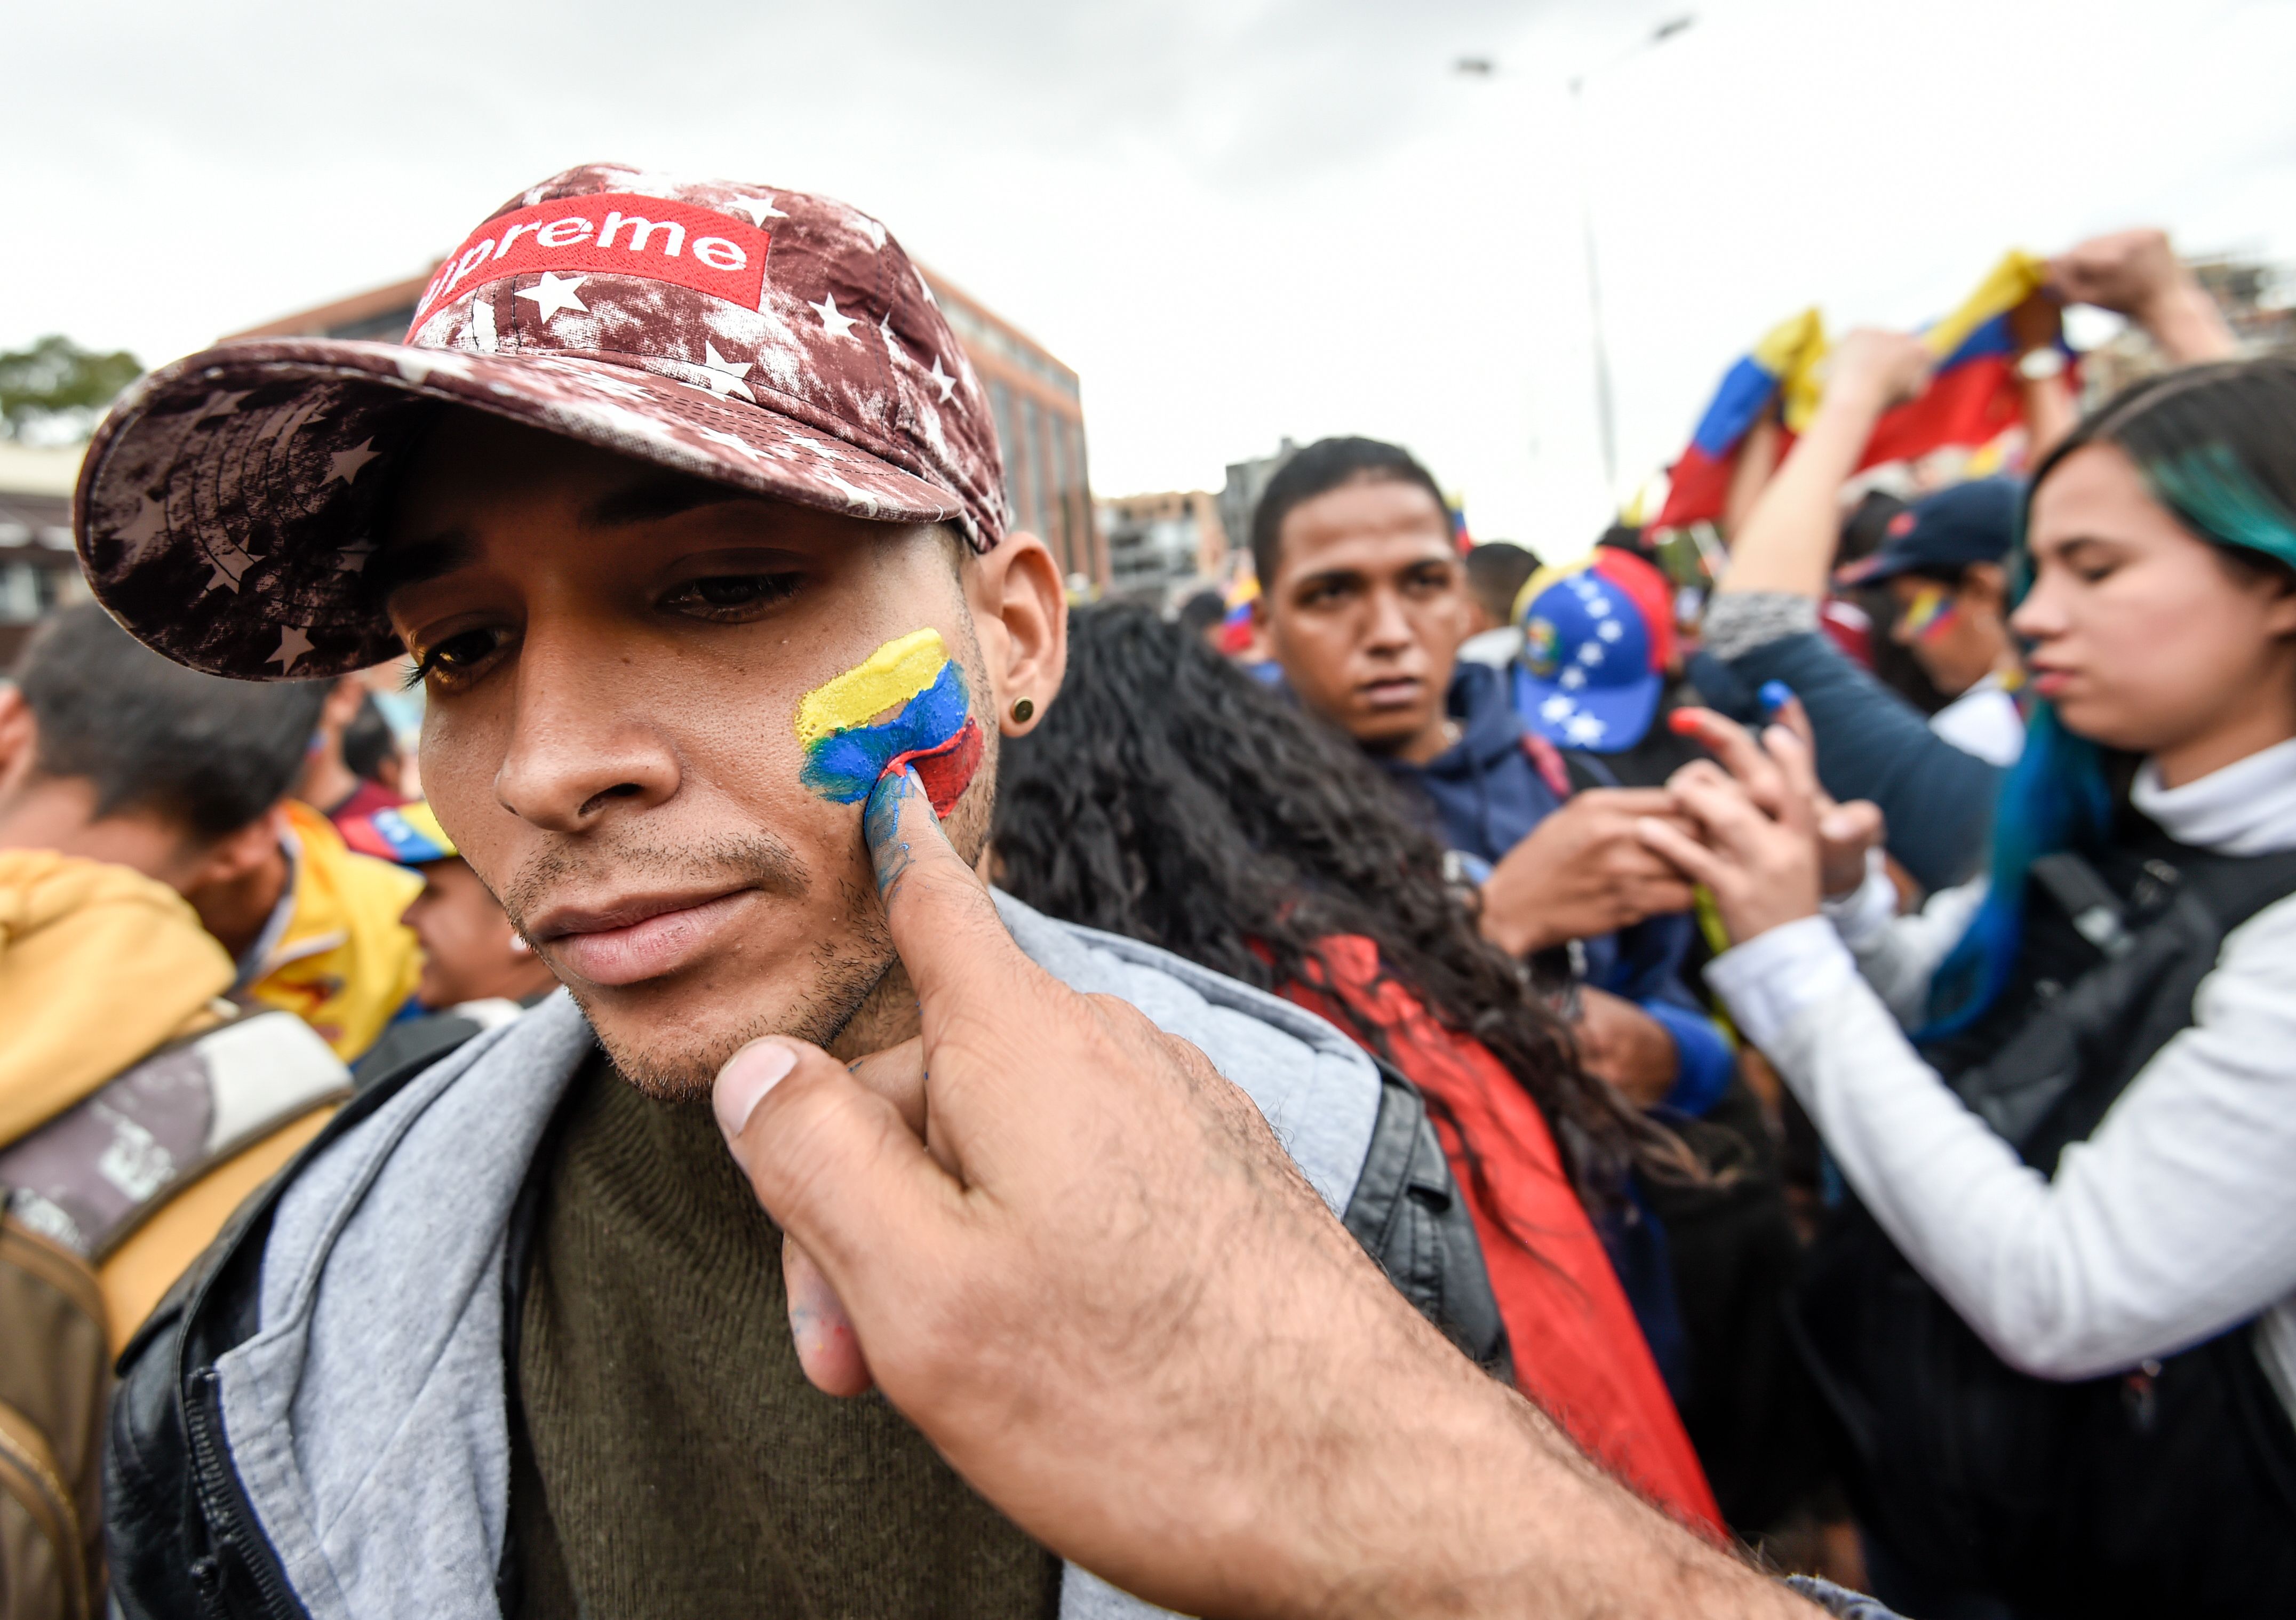 Venezuelans opposed to President Nicolas Maduro hold a demonstration in Bogota, Colombia in support of opposition leader Juan Guaido's self-proclamation as acting president of Venezuela, on January 23, 2019. (Photo by Juan BARRETO / AFP) (Photo credit should read JUAN BARRETO/AFP/Getty Images)